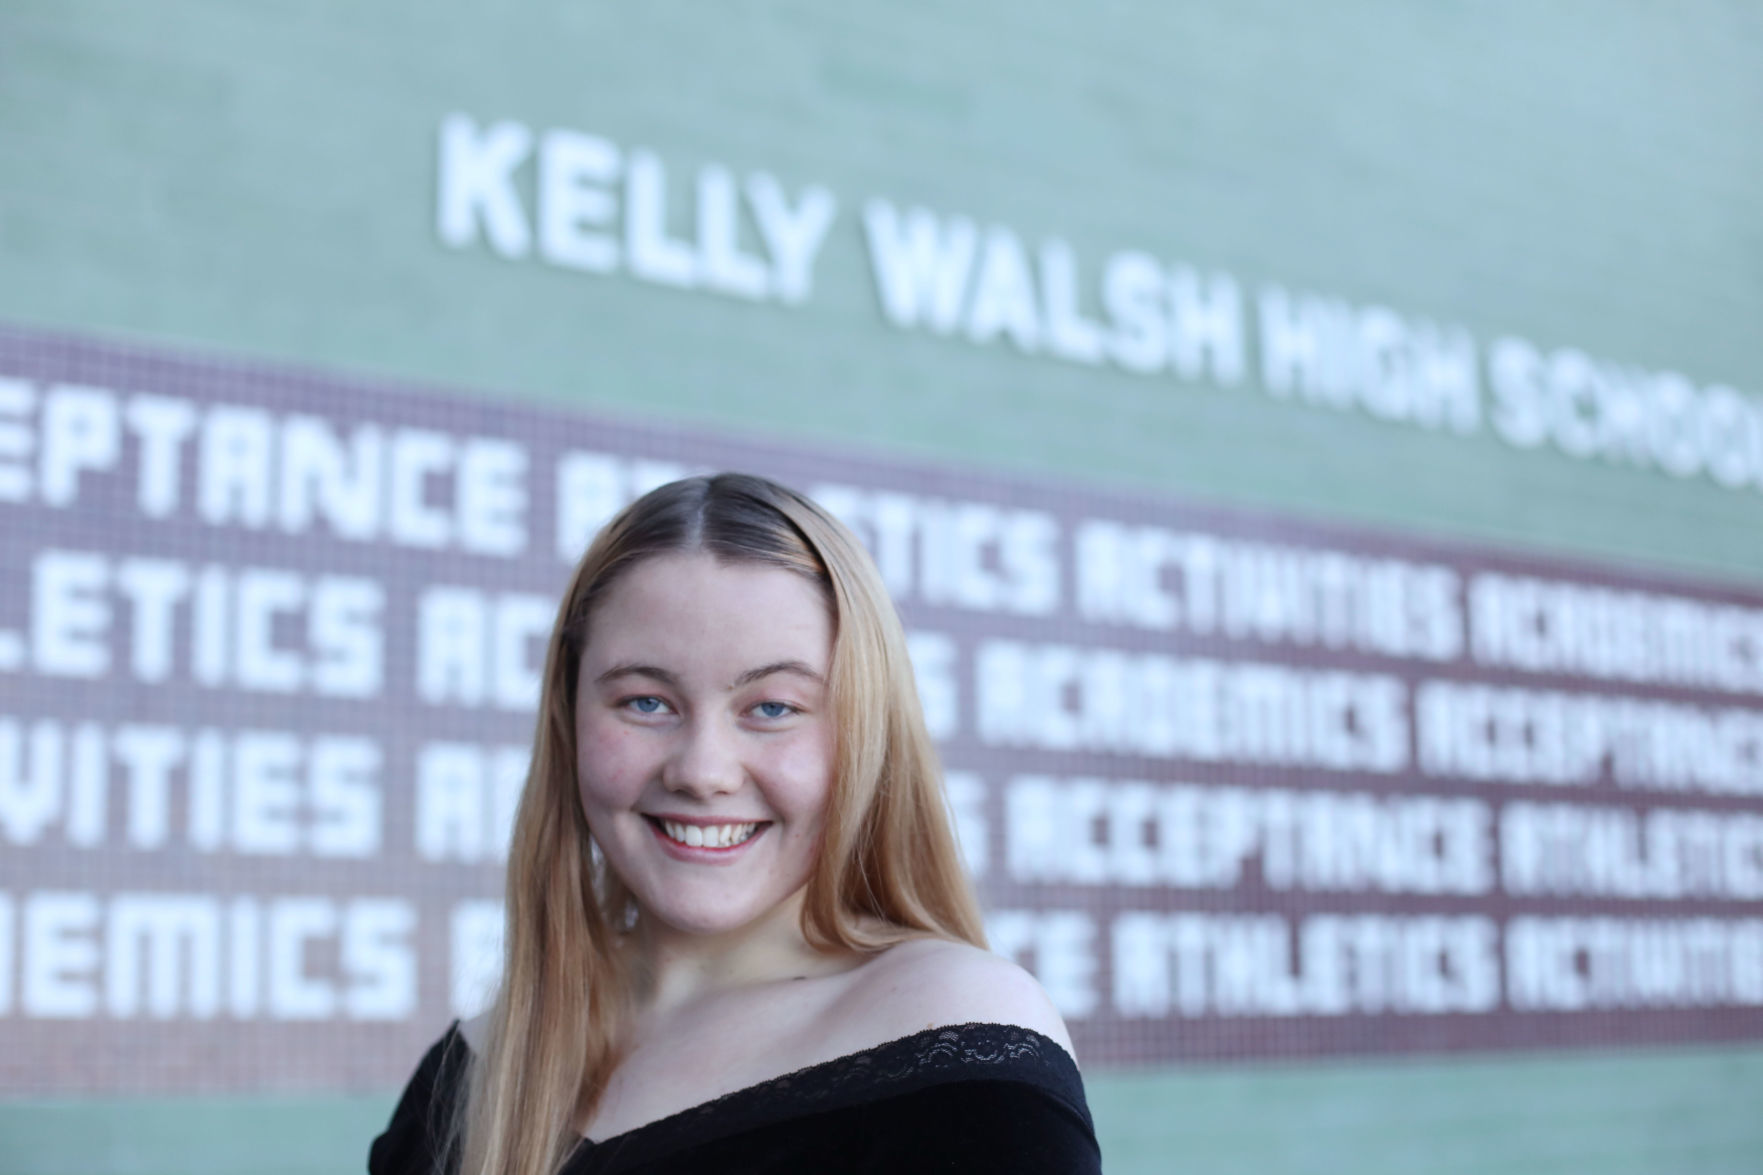 Kelly Walsh student works to improve community